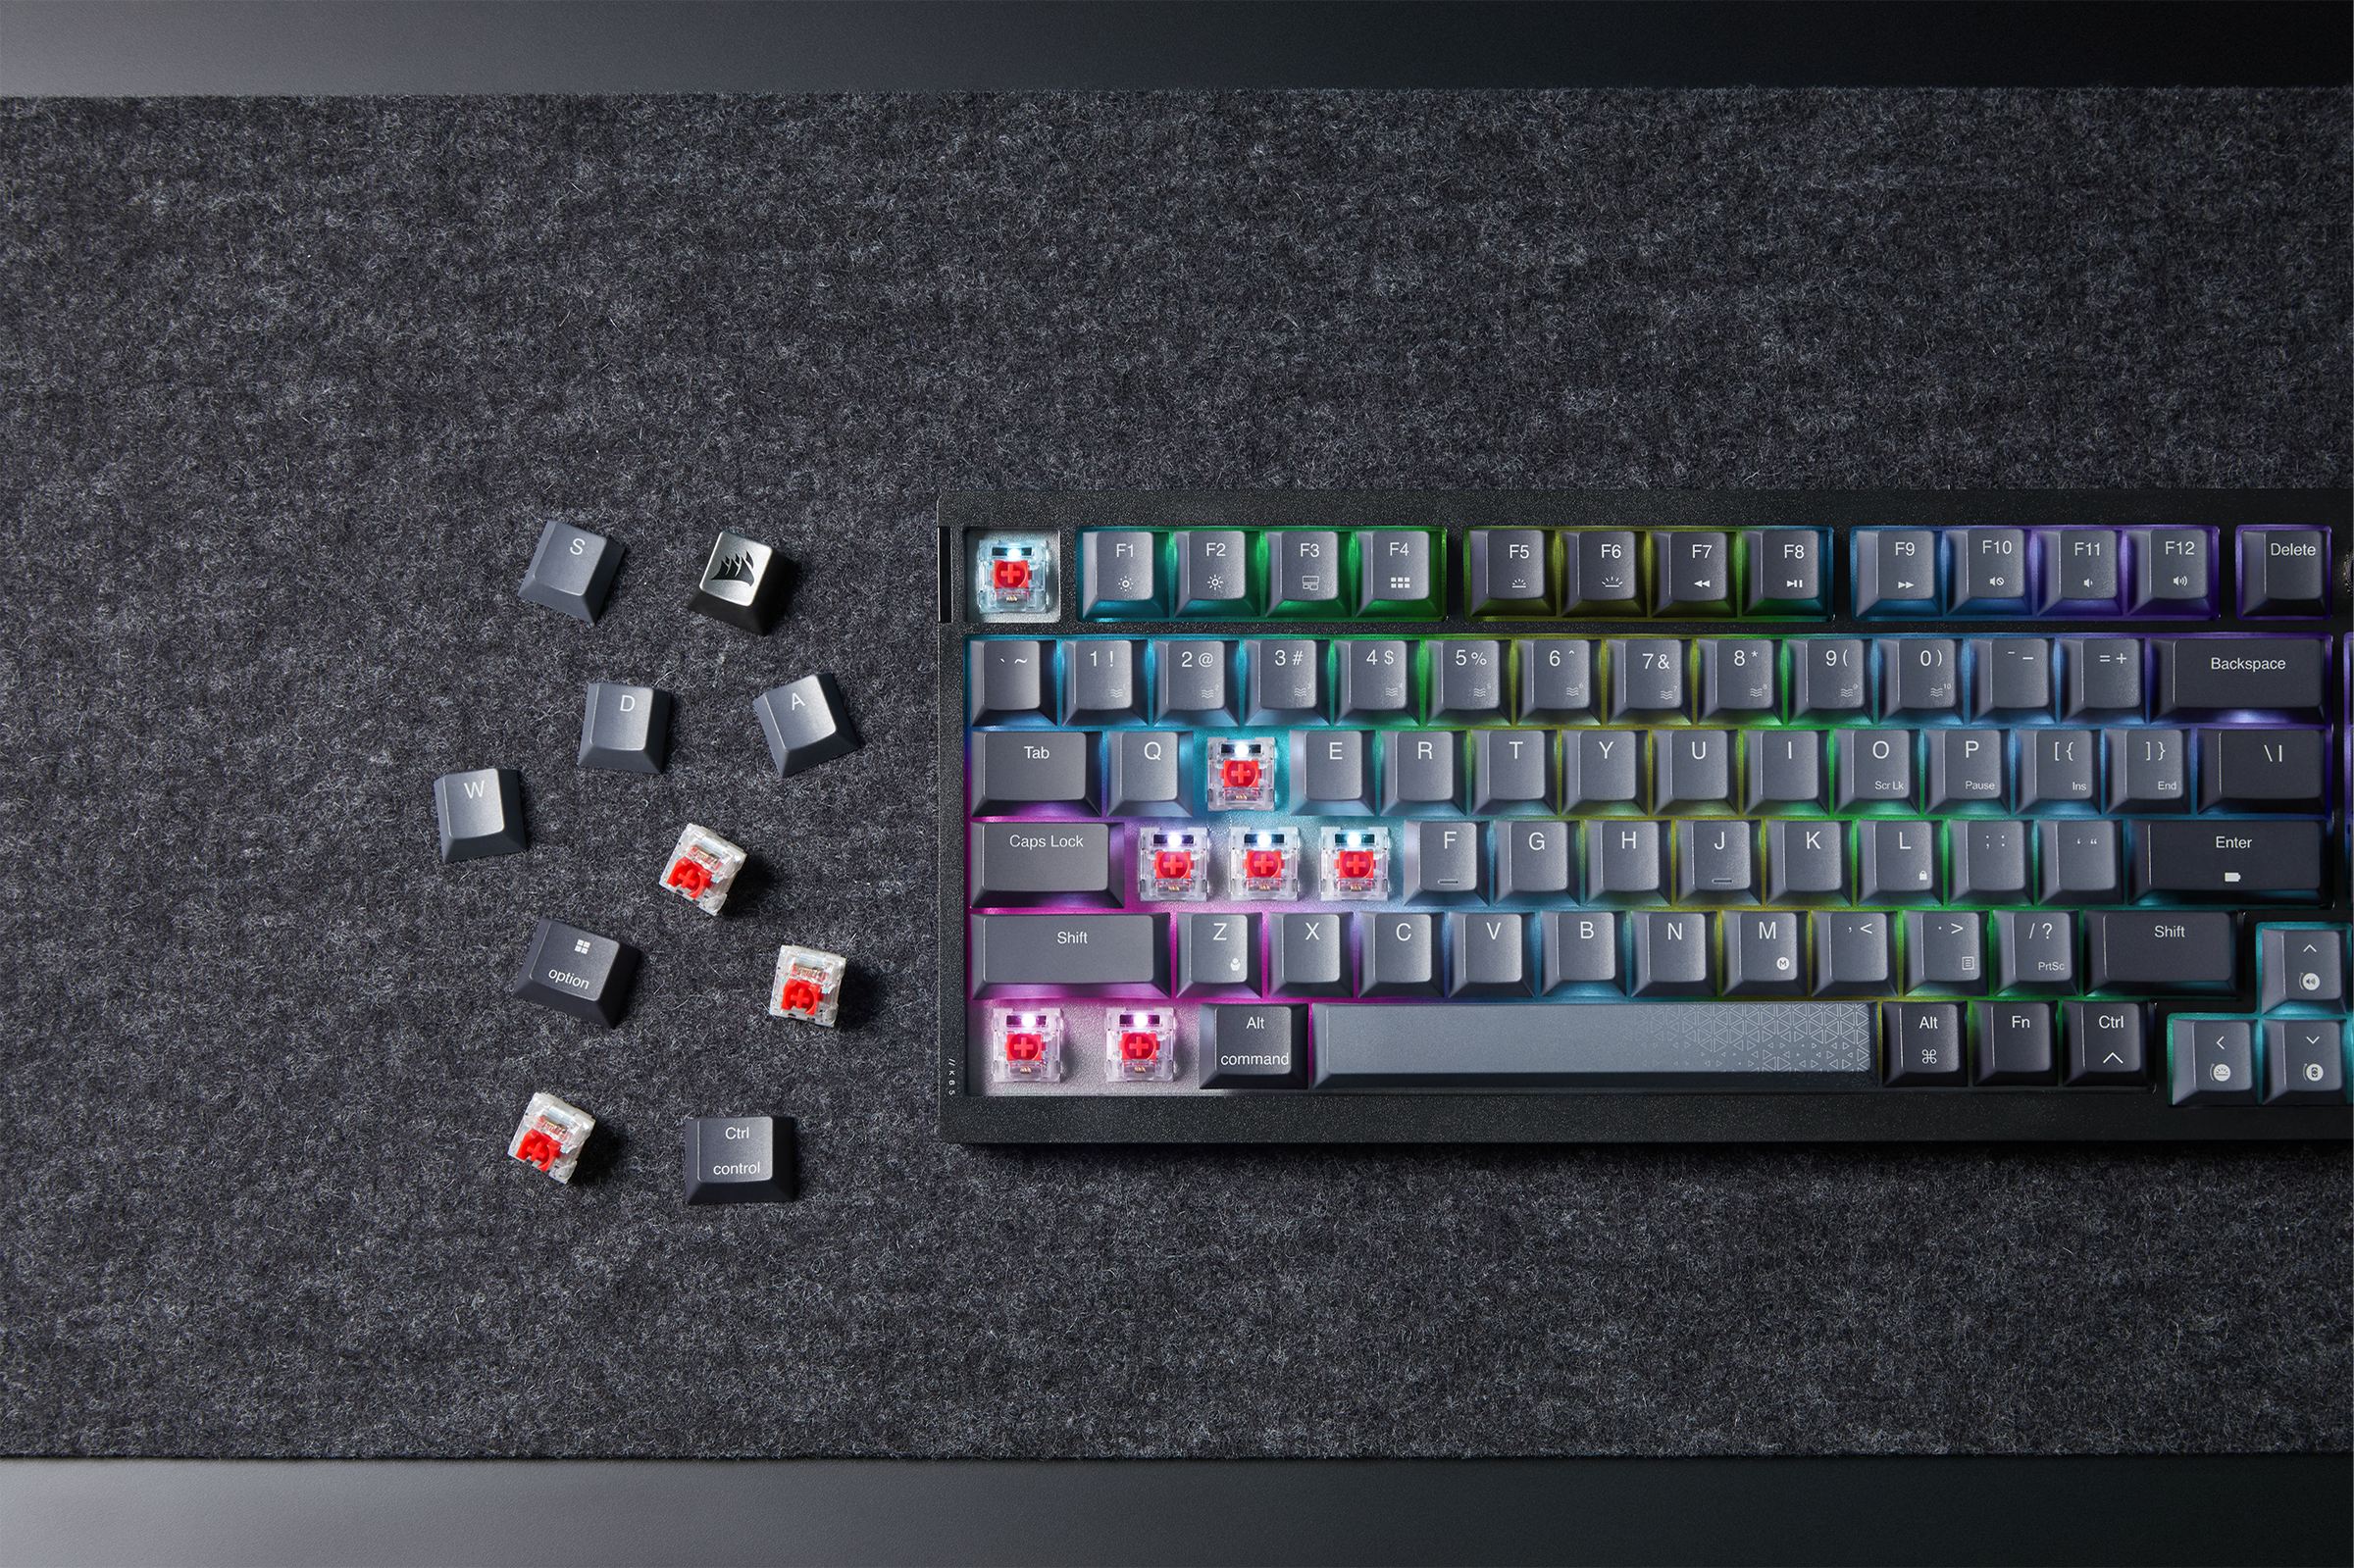 Keyboard with keycaps removed and switches showing.